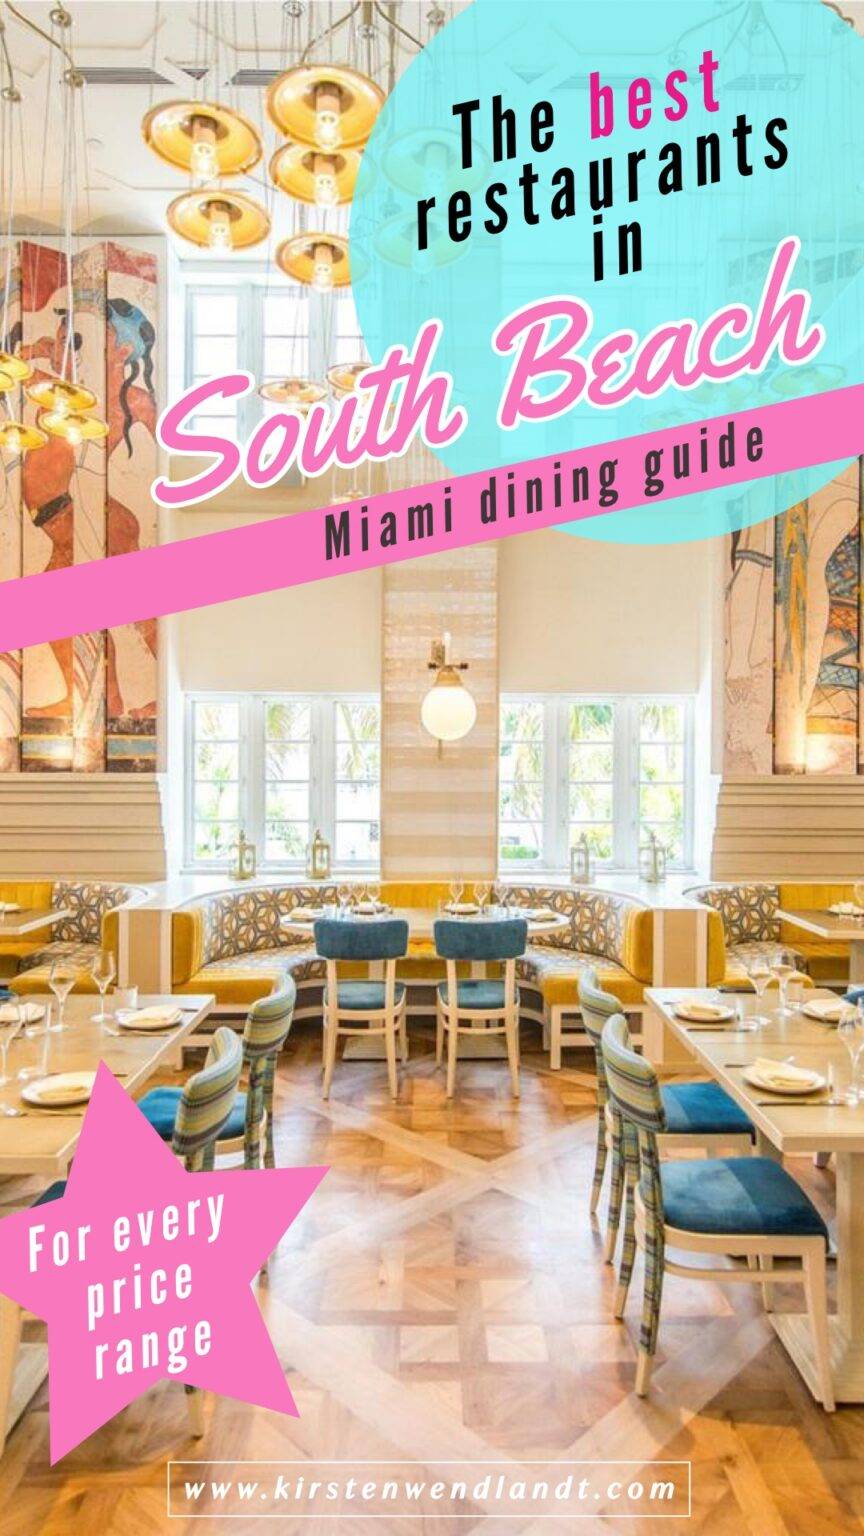 11 Best Restaurants in South Beach, Miami From Cheap Eats to Fine Dining